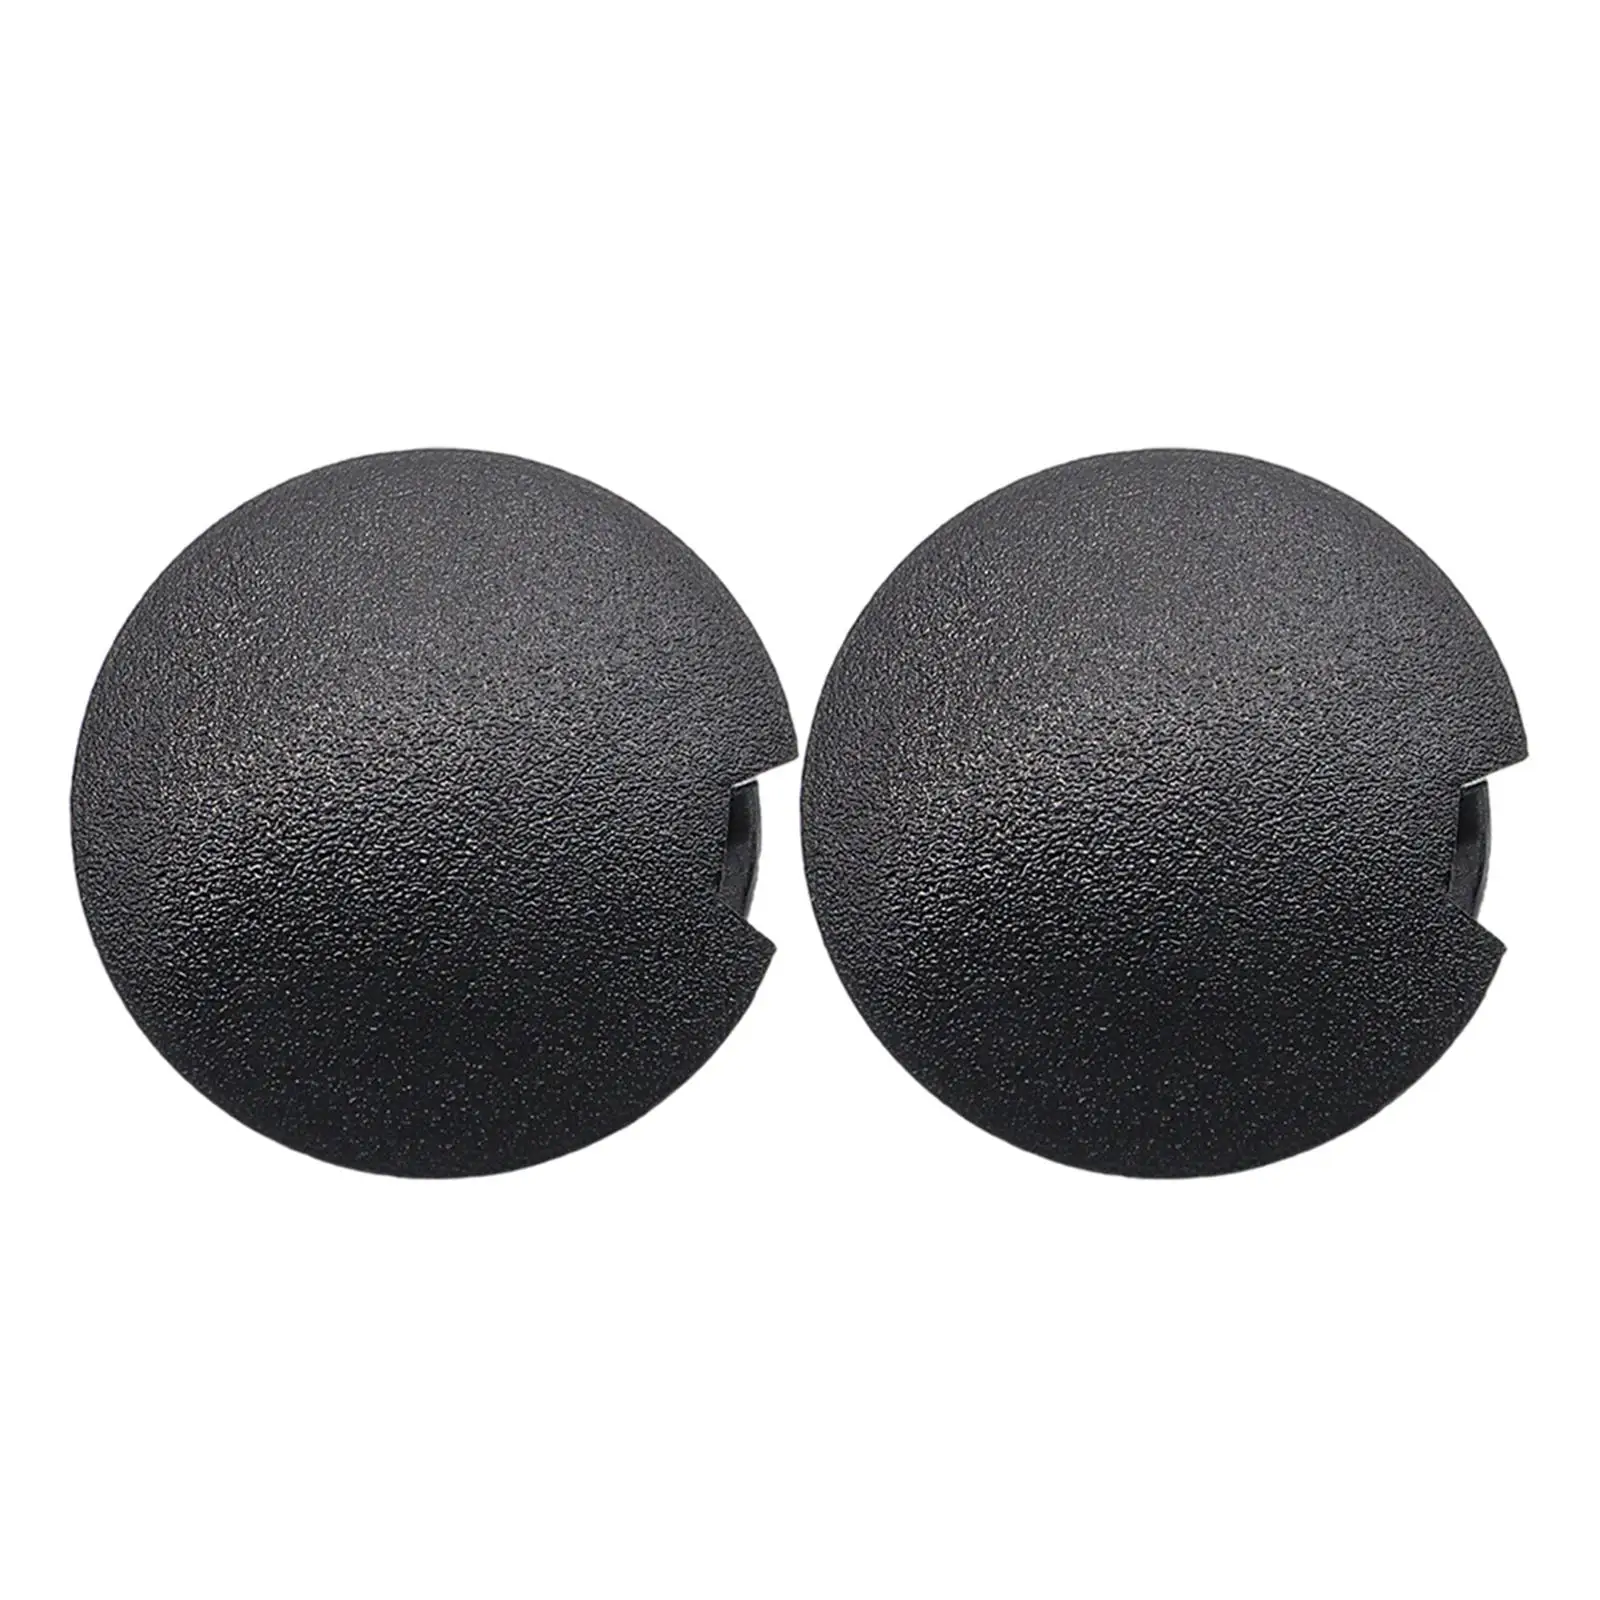 2 Pieces Rear Bumper Tow Hook Cover Towing Eye Lid Cap for Smart 451 Trailer